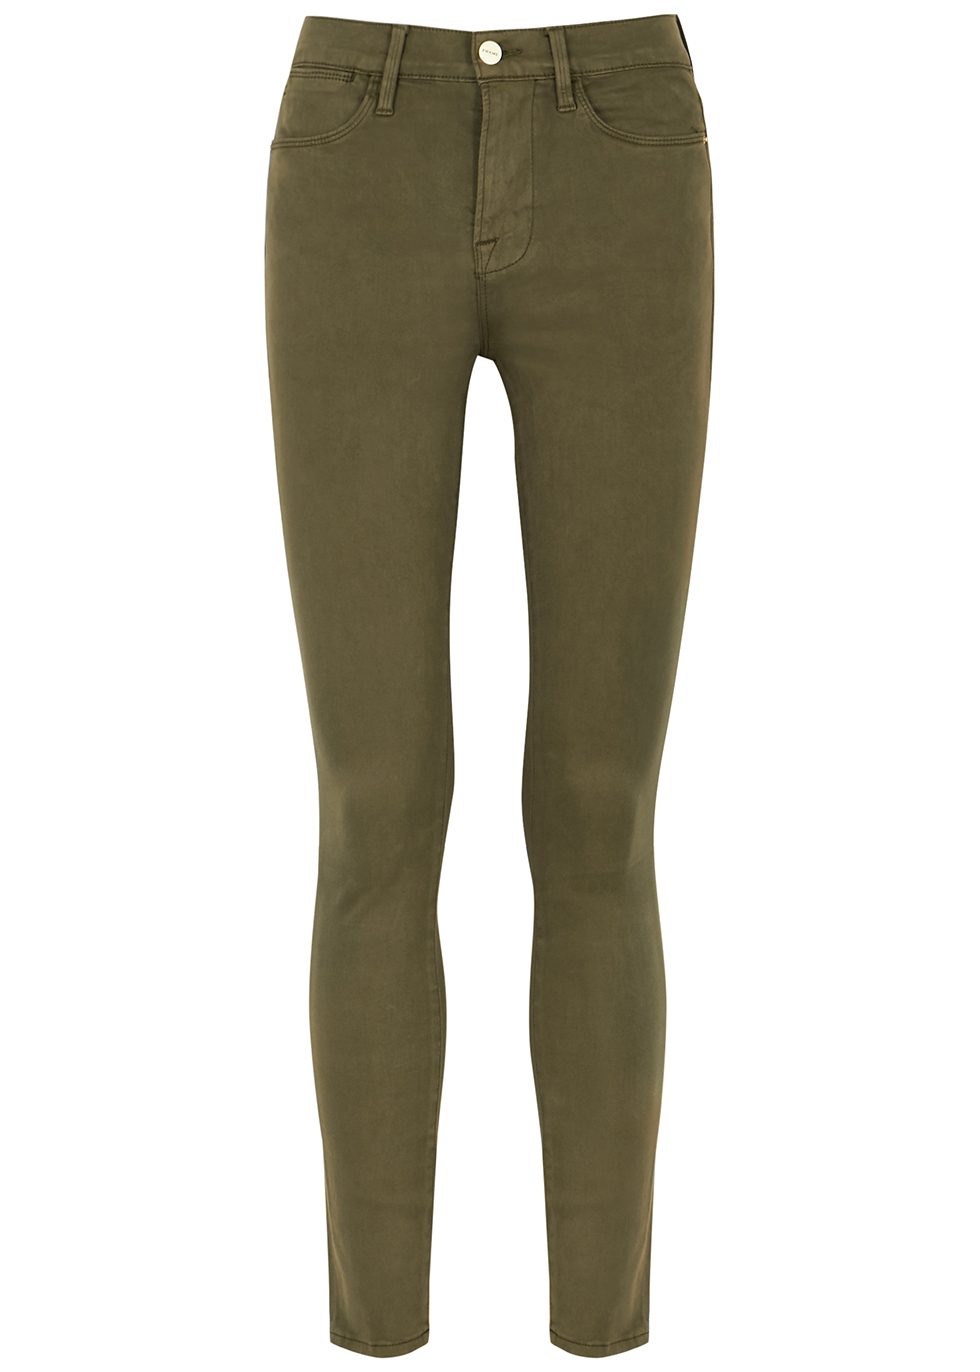 Le High Skinny army green jeans